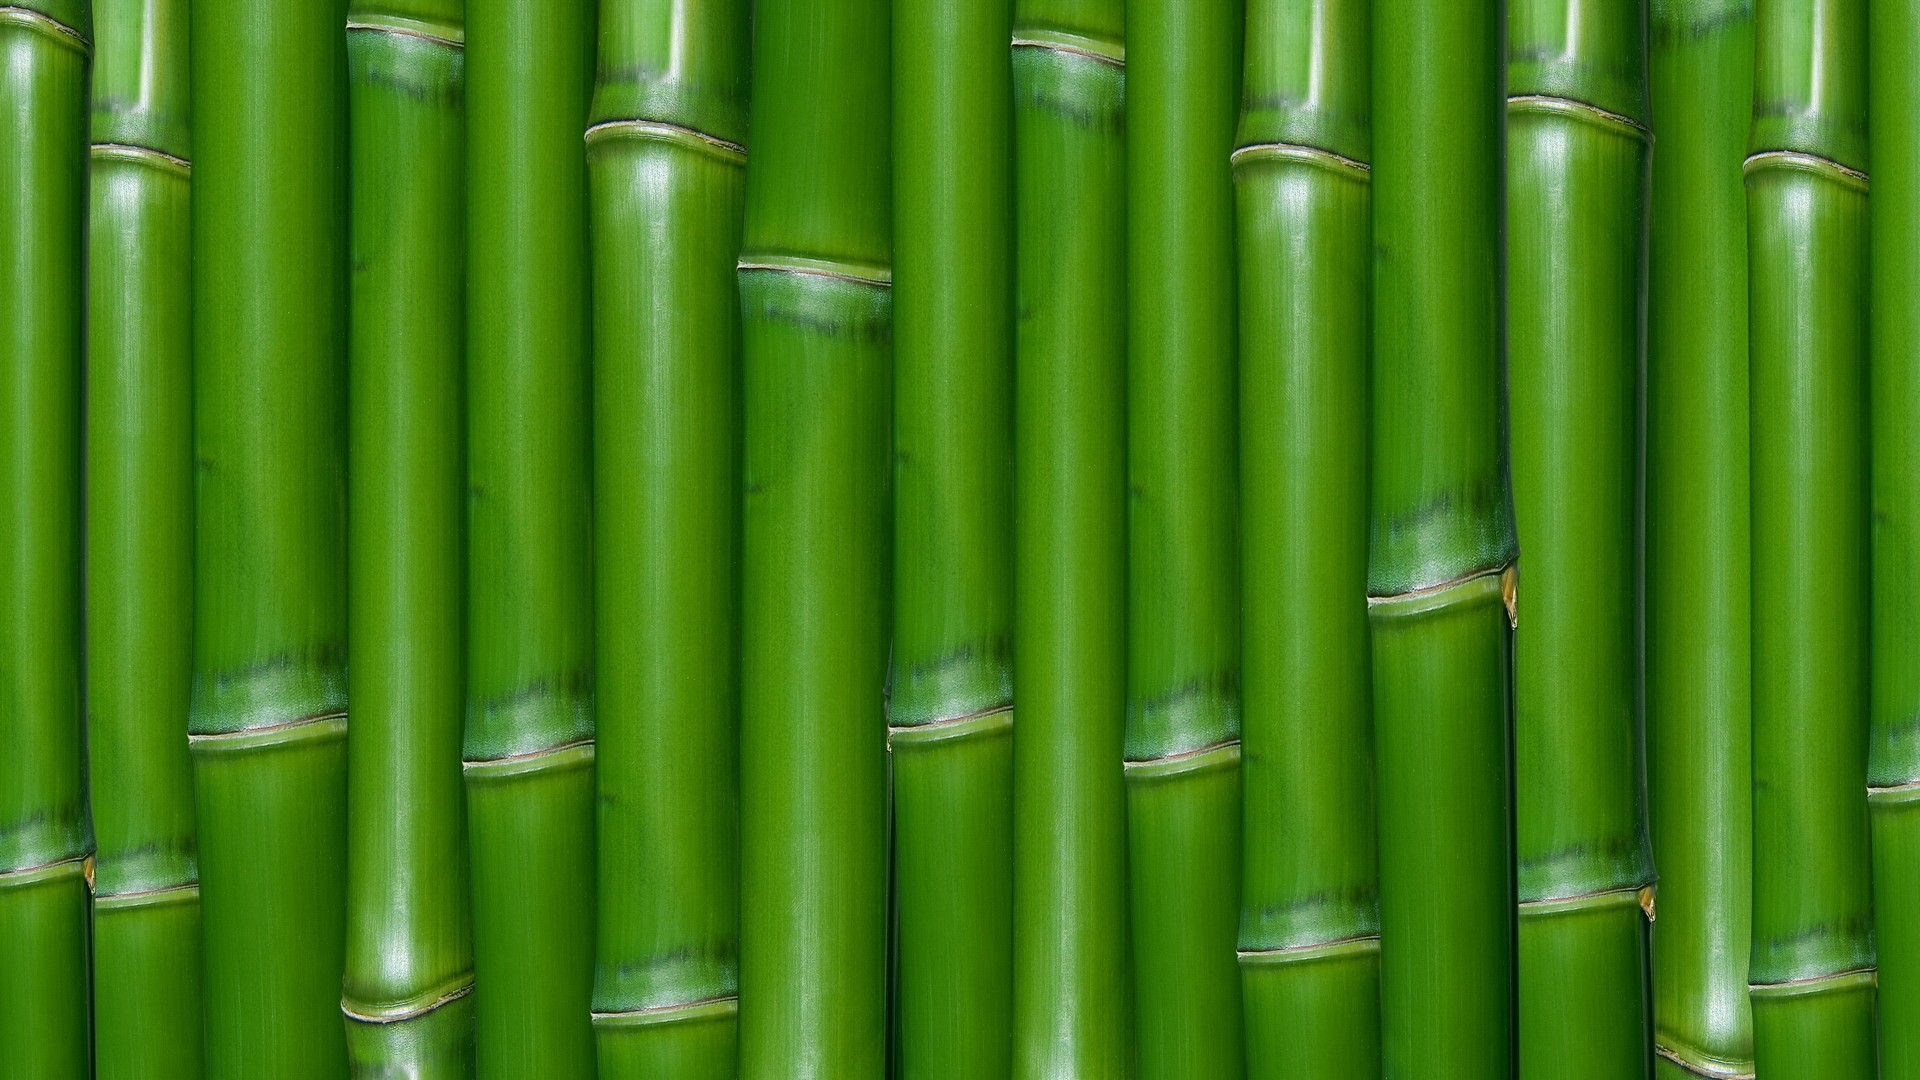 General 1920x1080 bamboo wood texture plants